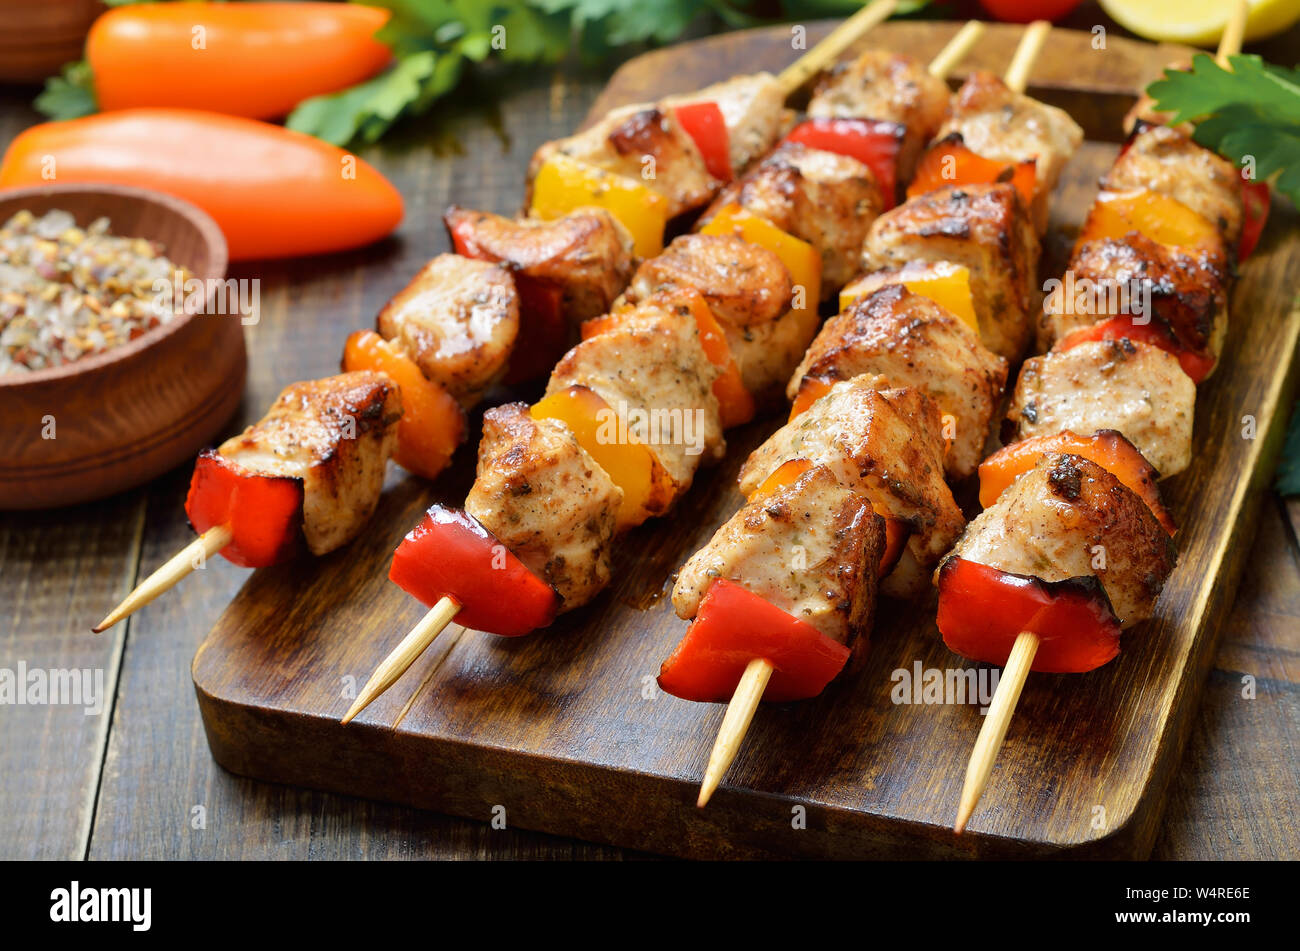 Grilled chicken kebabs on wooden table Stock Photo